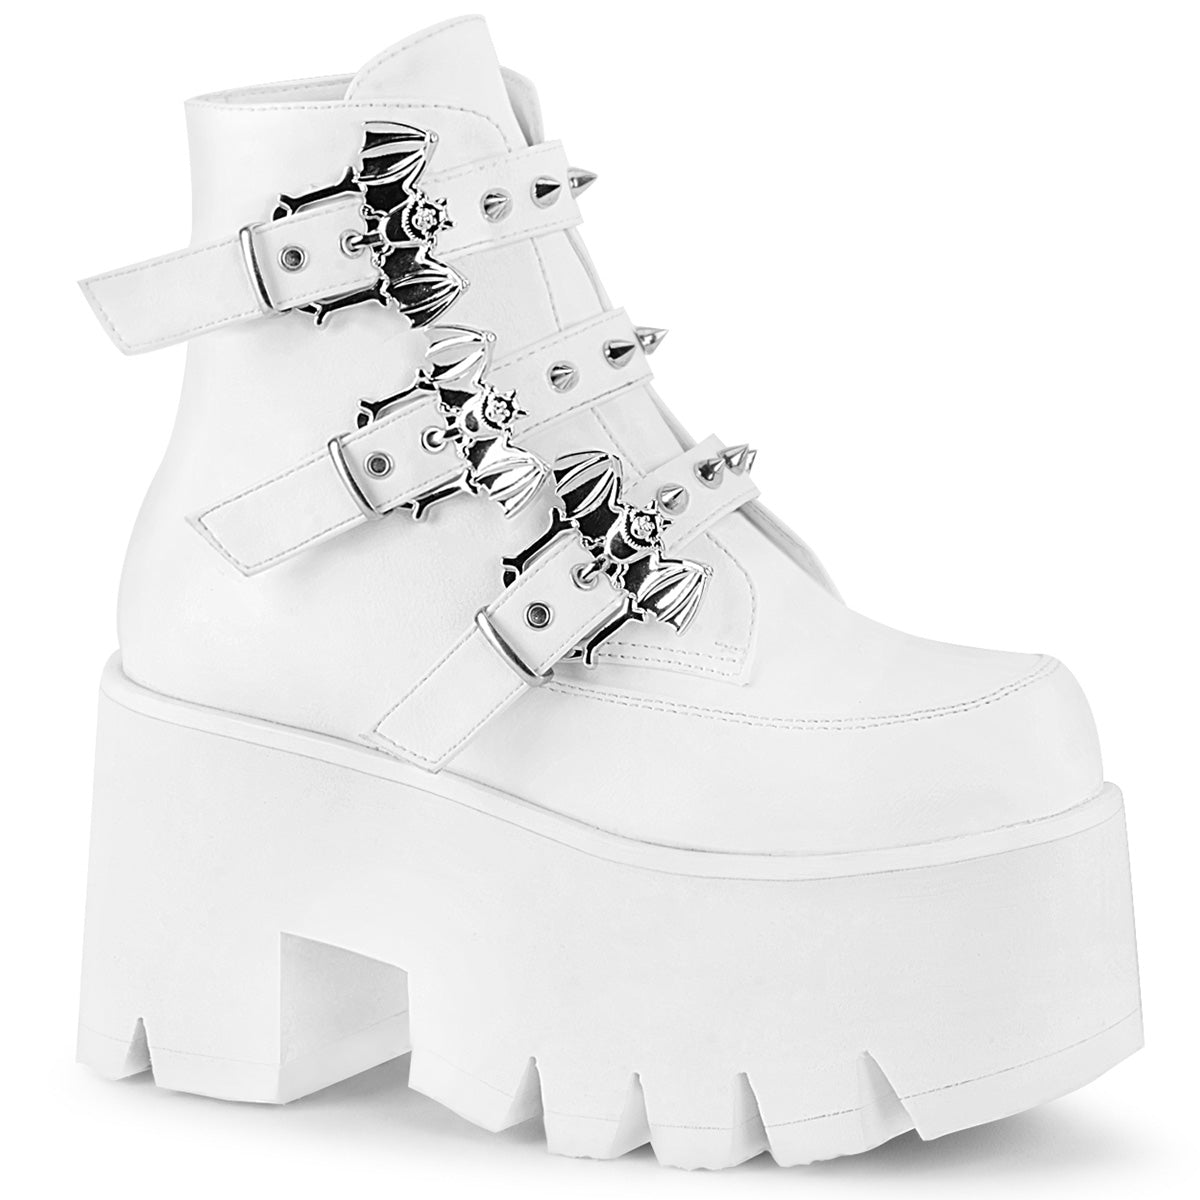 Demonia Ashes 55 White - Model Express VancouverBoots